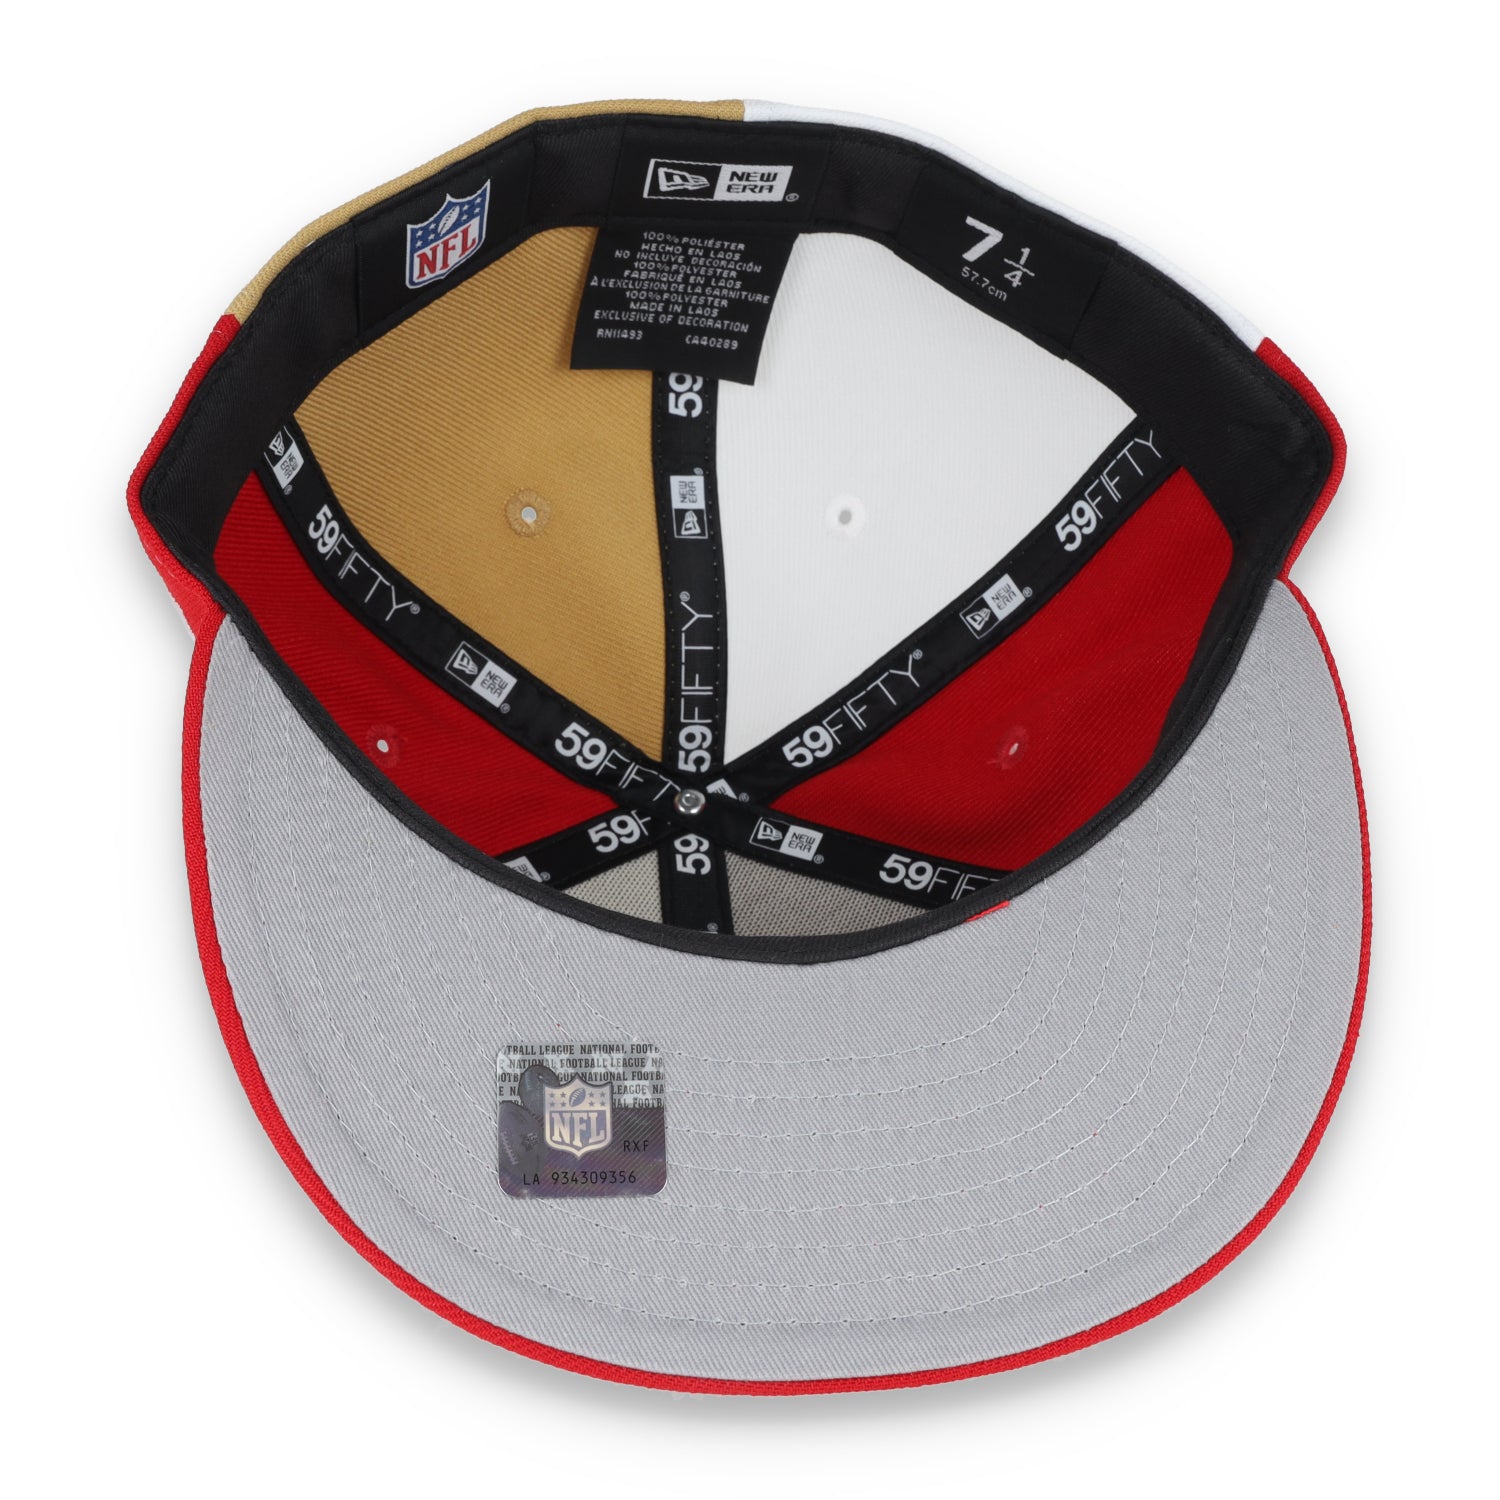 New Era San Francisco 49ers NFL Sideline 59Fifty Fitted